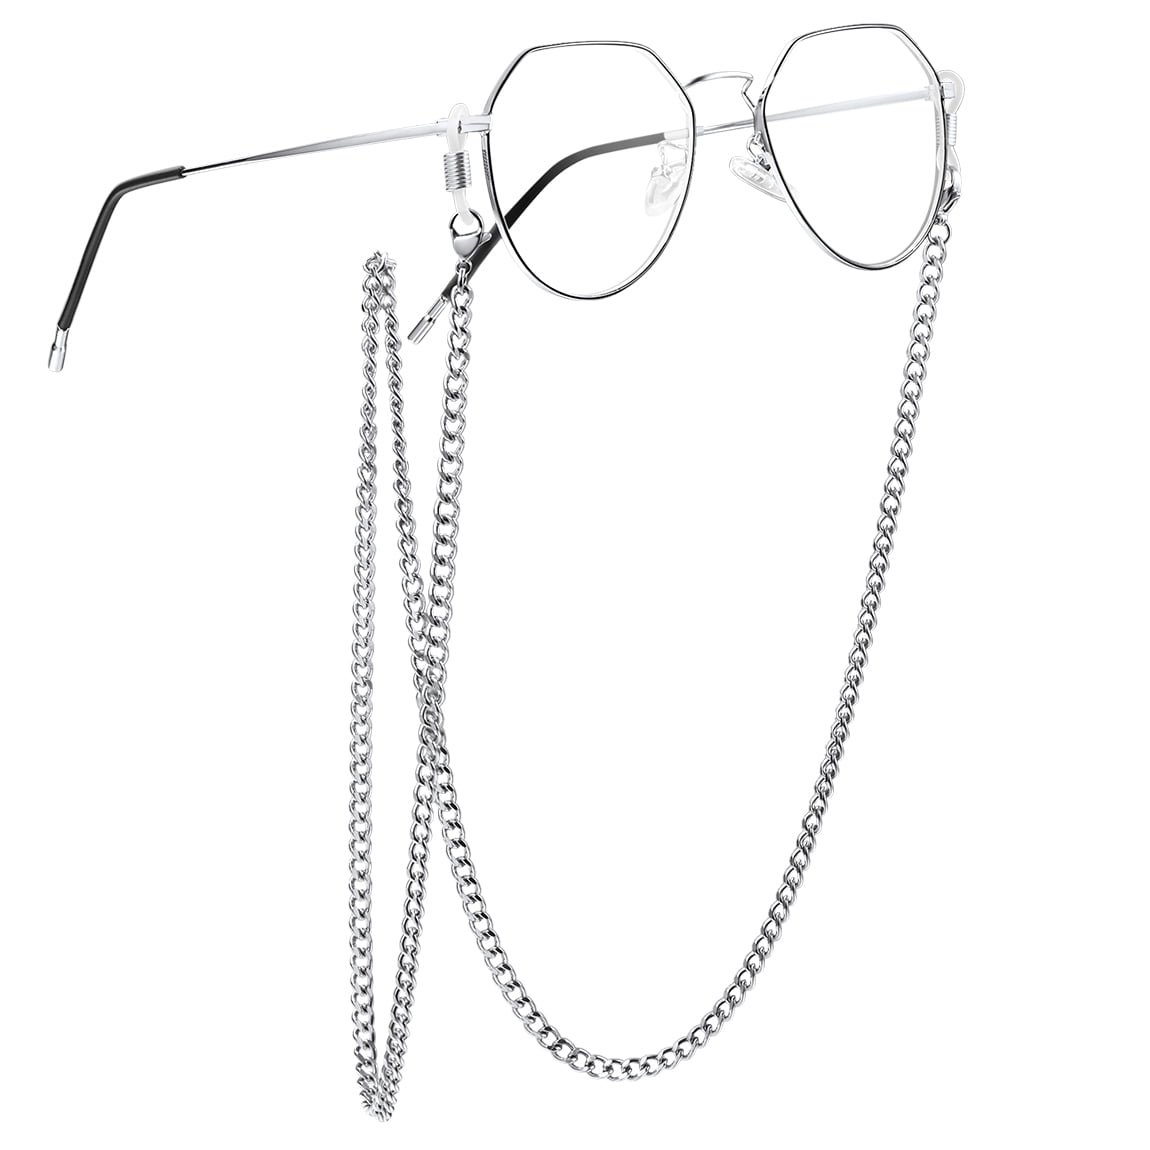 Eyeglass Chain,Glasses Chains Necklace,Stainless Steel Sunglasses Links  Holder, Grandmother Chains,Men Women Eyewear Chain